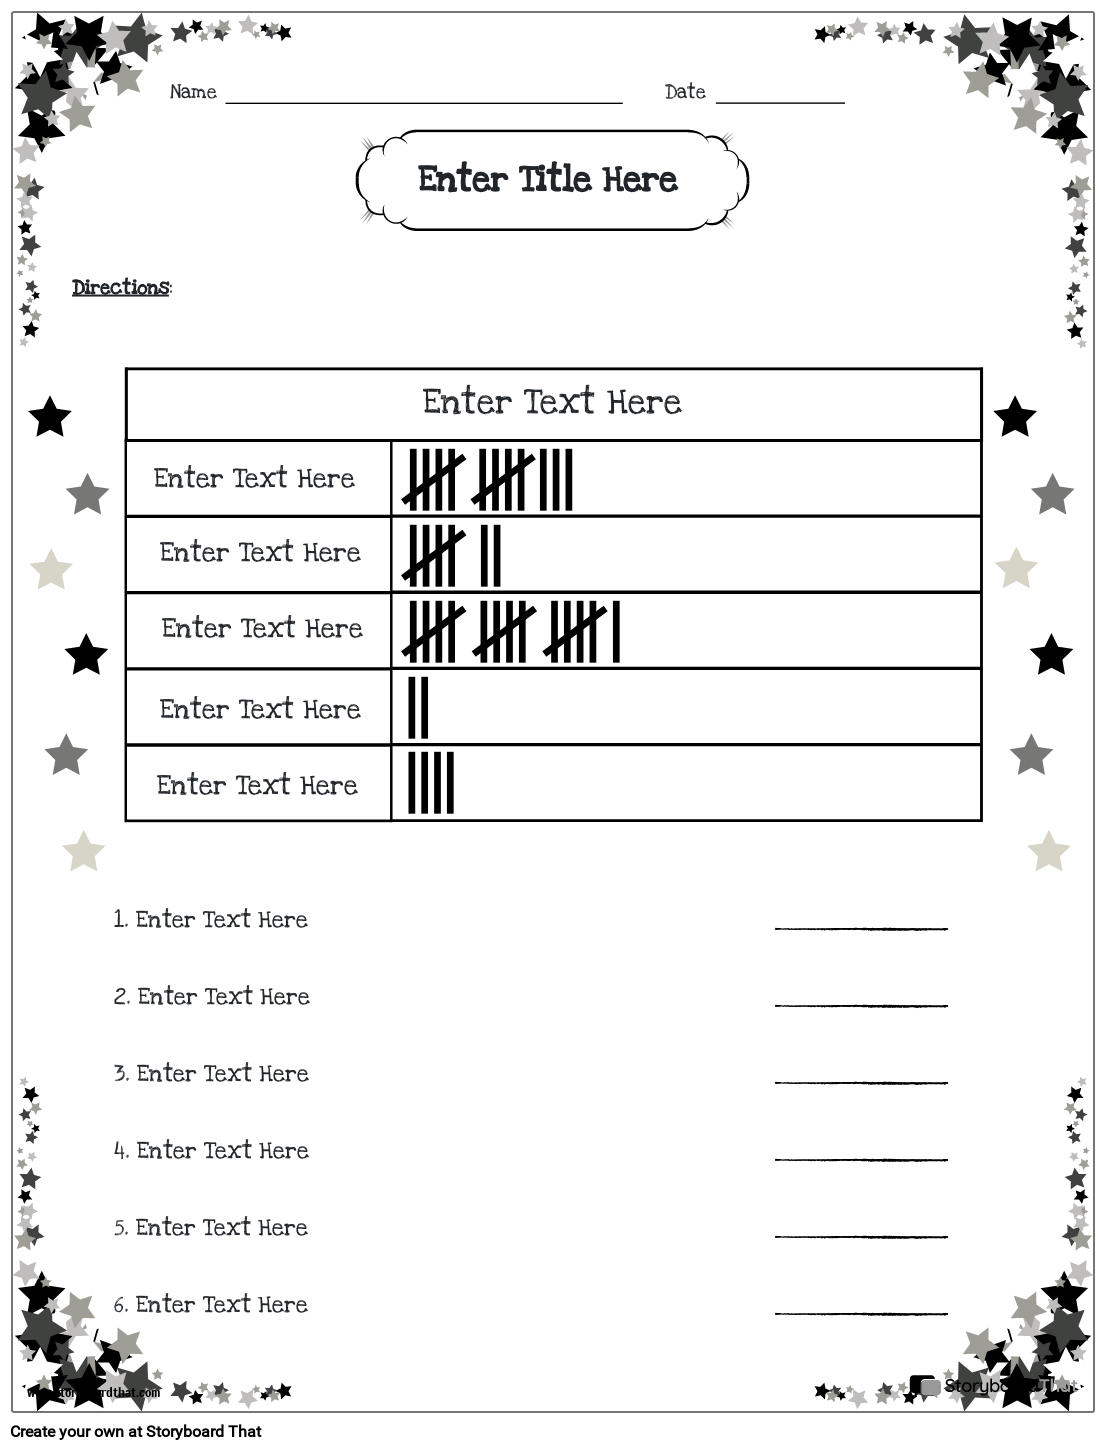 Tally black and white star themed template 